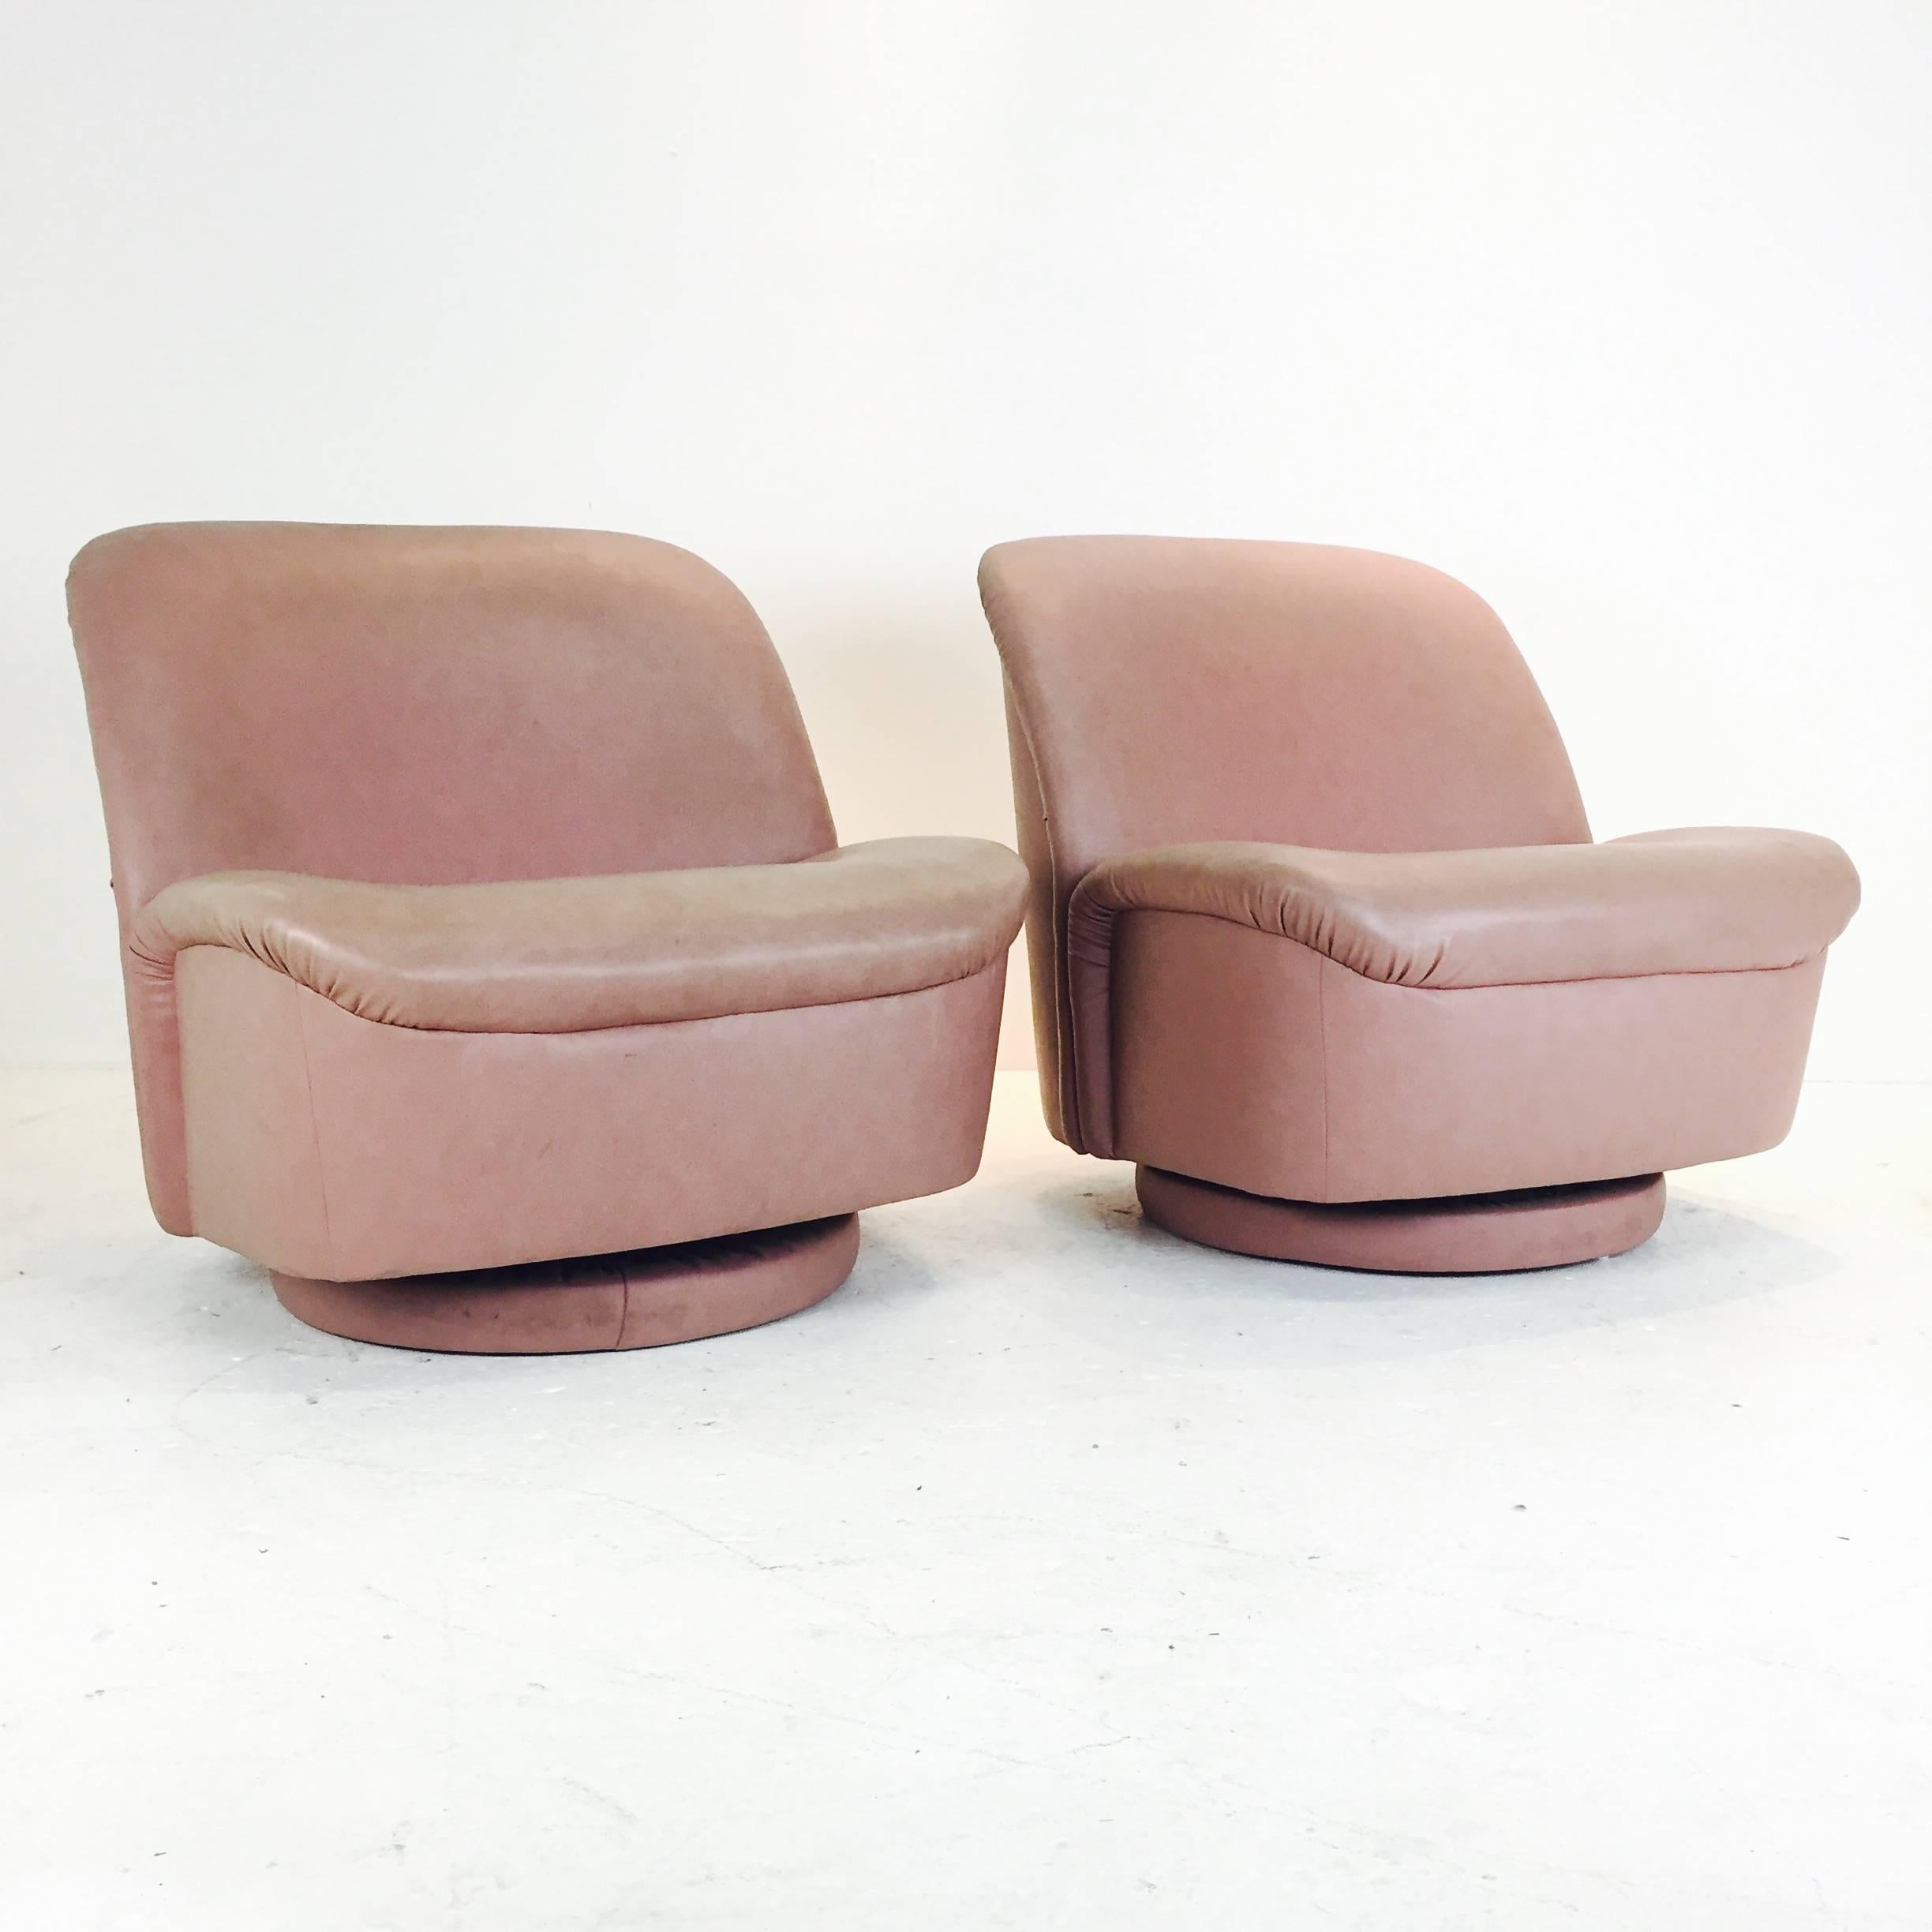 Pair of blush leather swivel and tilt chairs by Directional. In good vintage condition with signs of wear from use.

Dimensions: 32